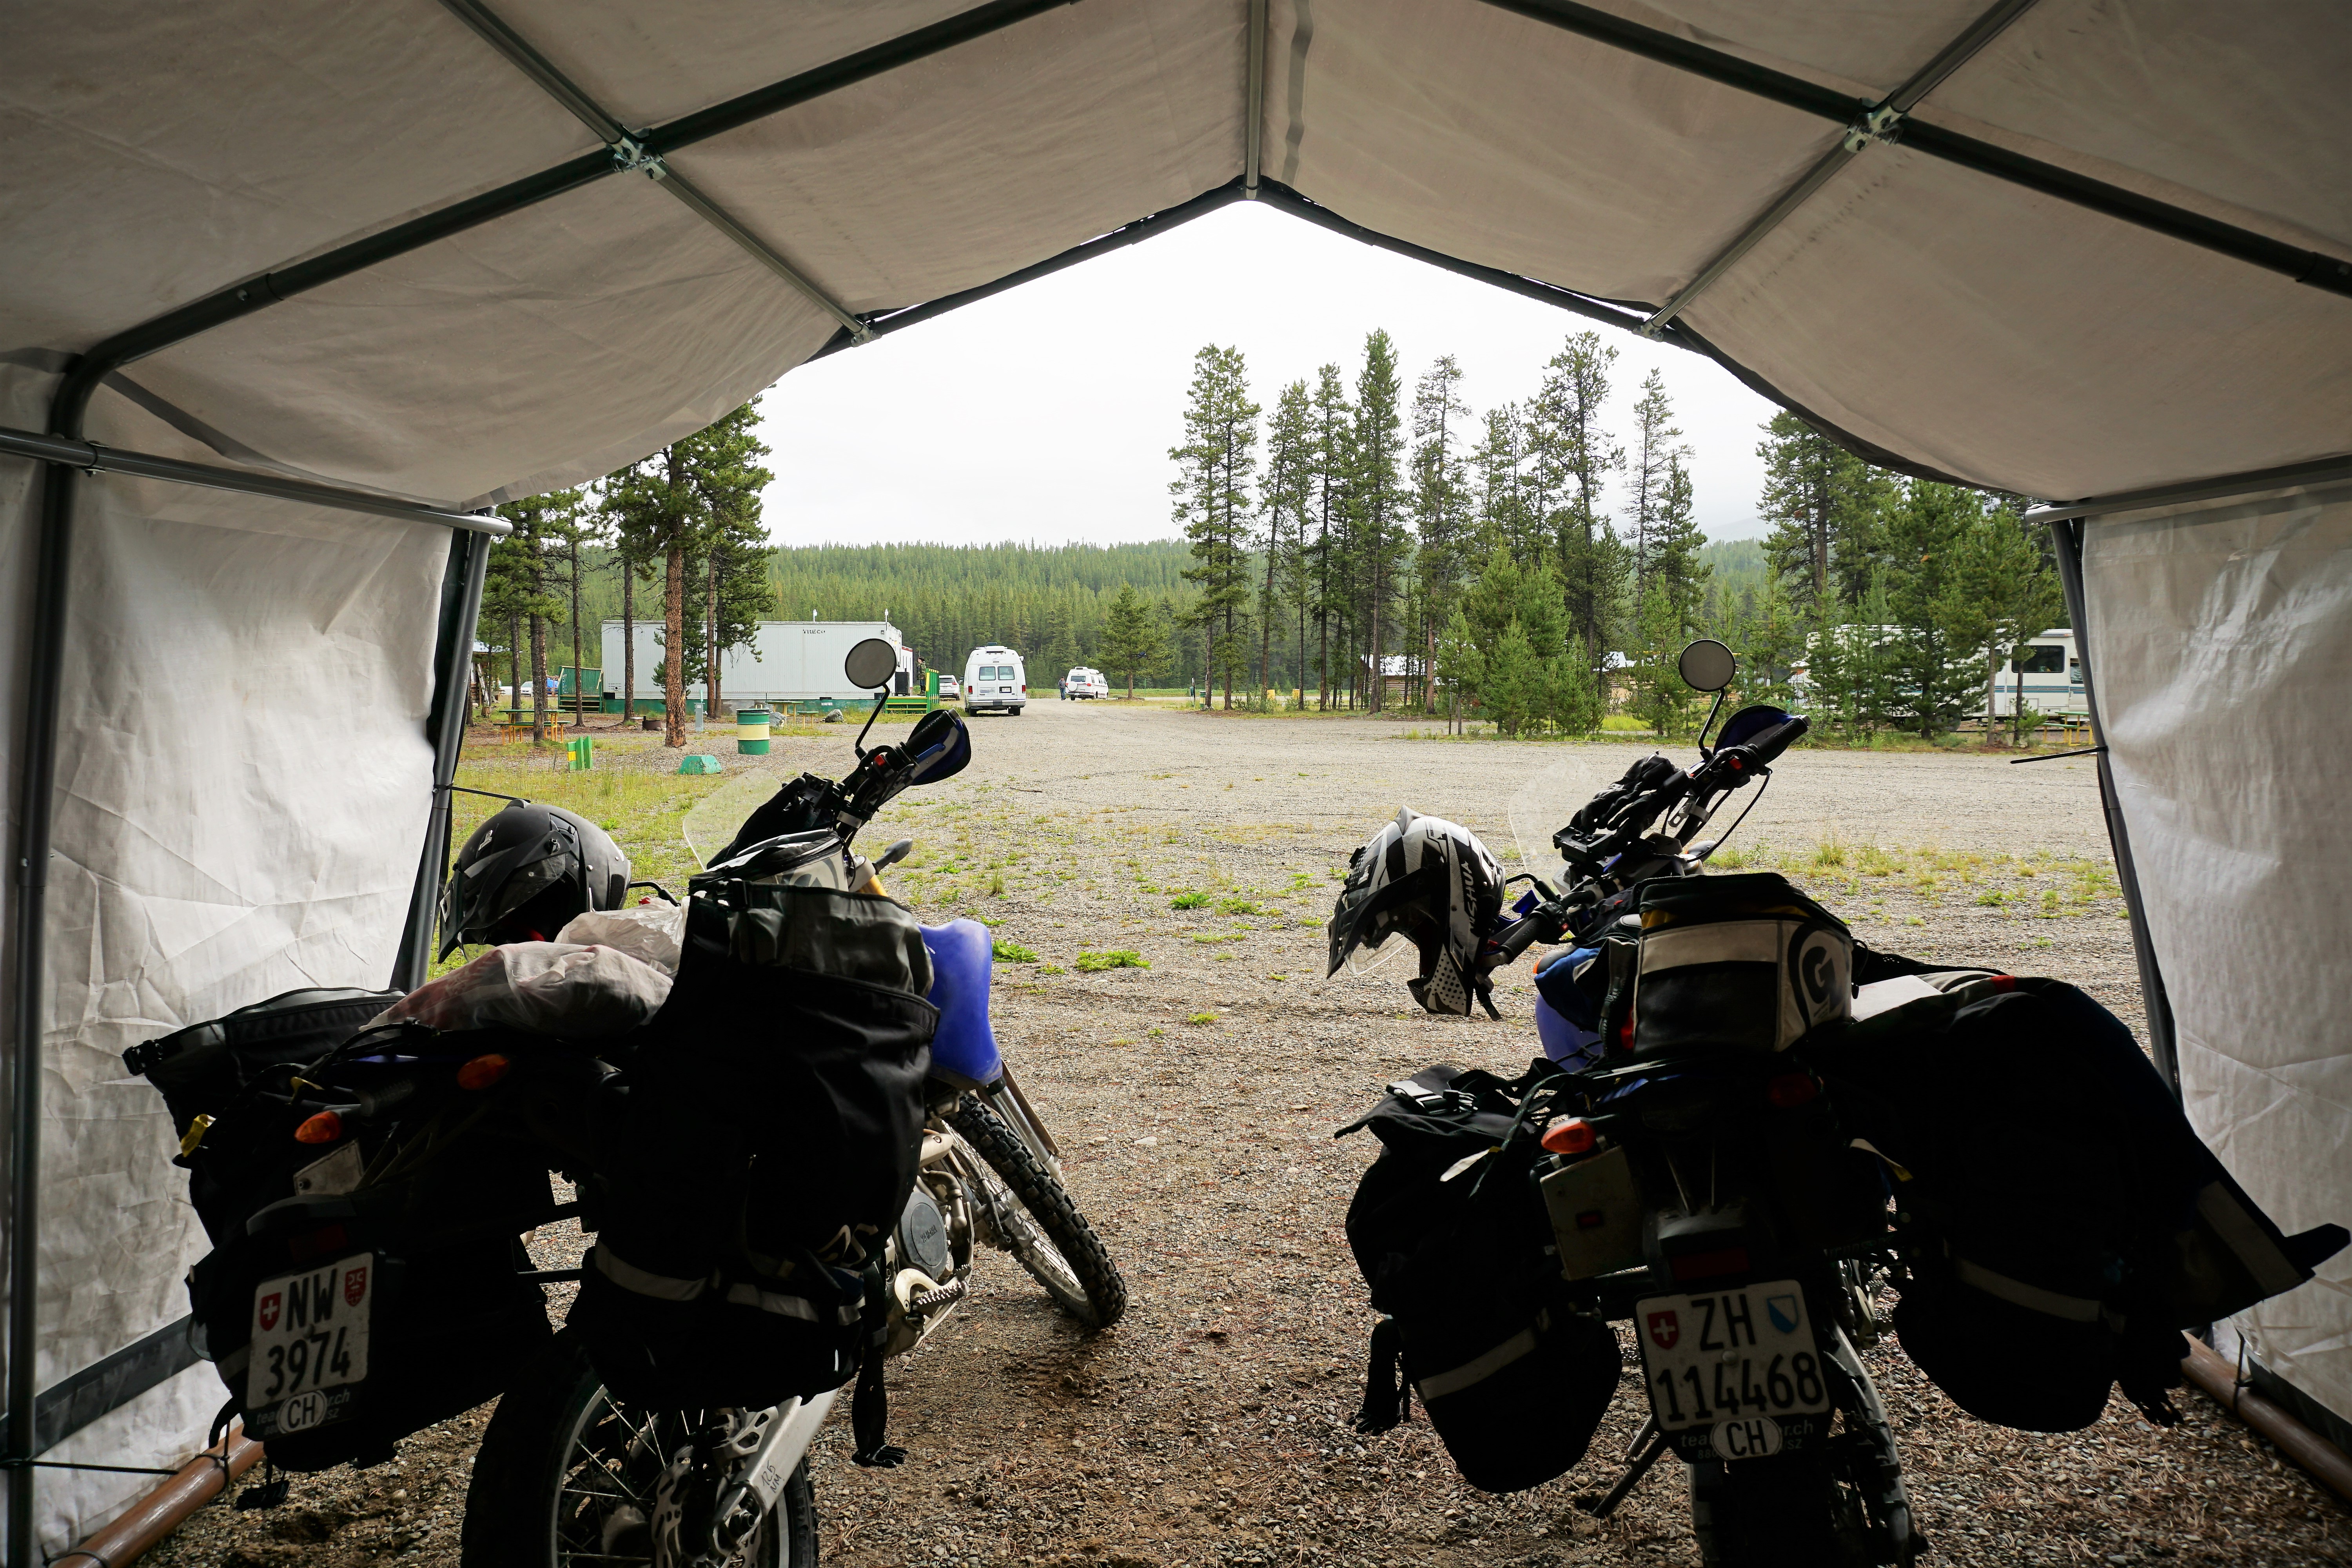 Even a tent for the bikes